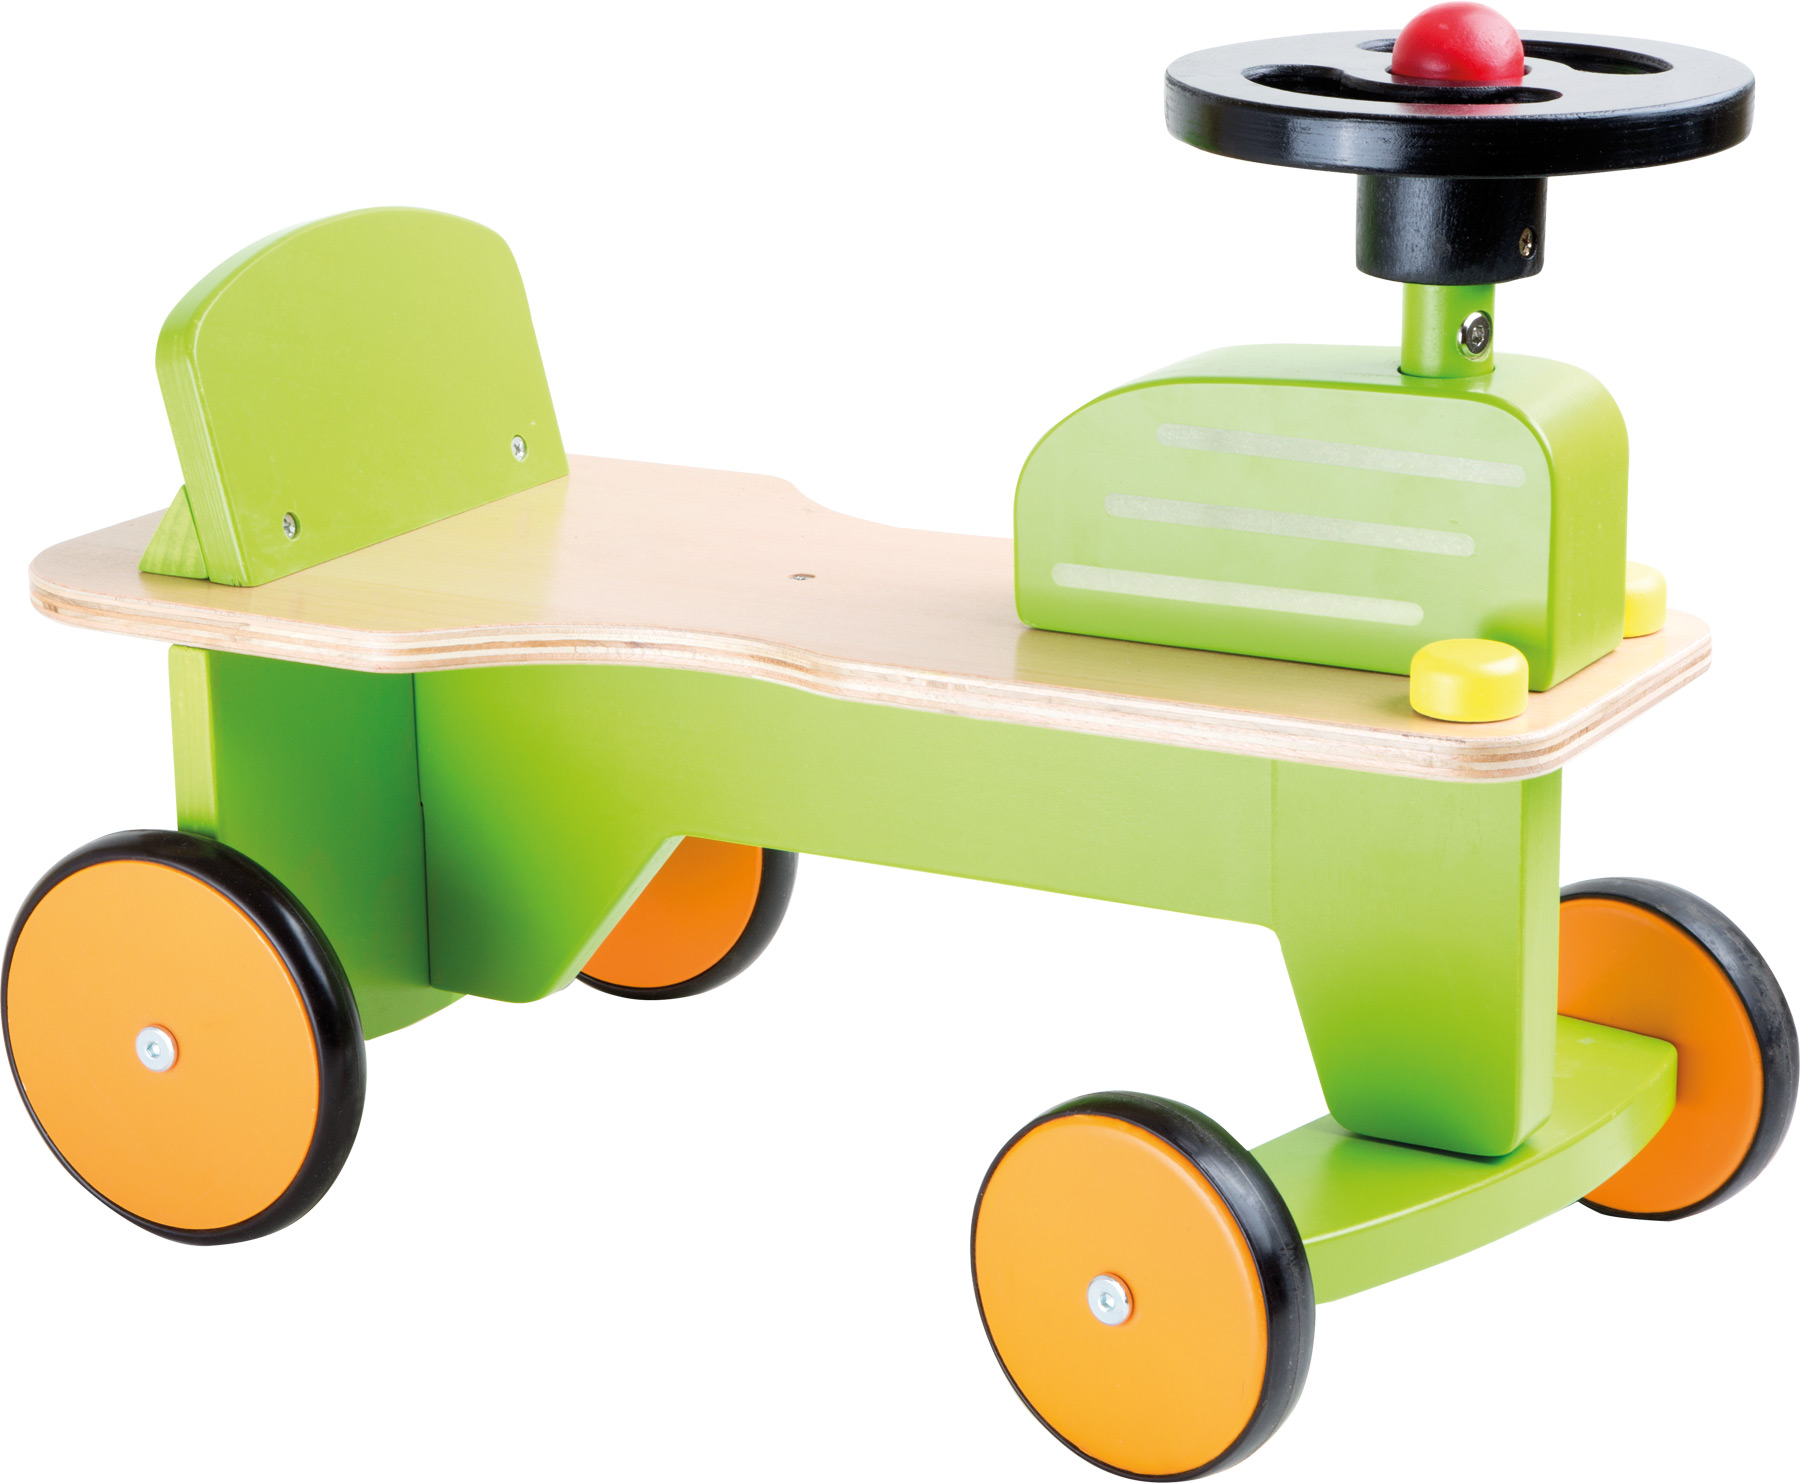 https://sw10261.sfstatic.io/upload_dir/shop/products/legler/small-foot/LG-10110/LG-10110-my-first-tractor-ride-on-toy-1.jpg